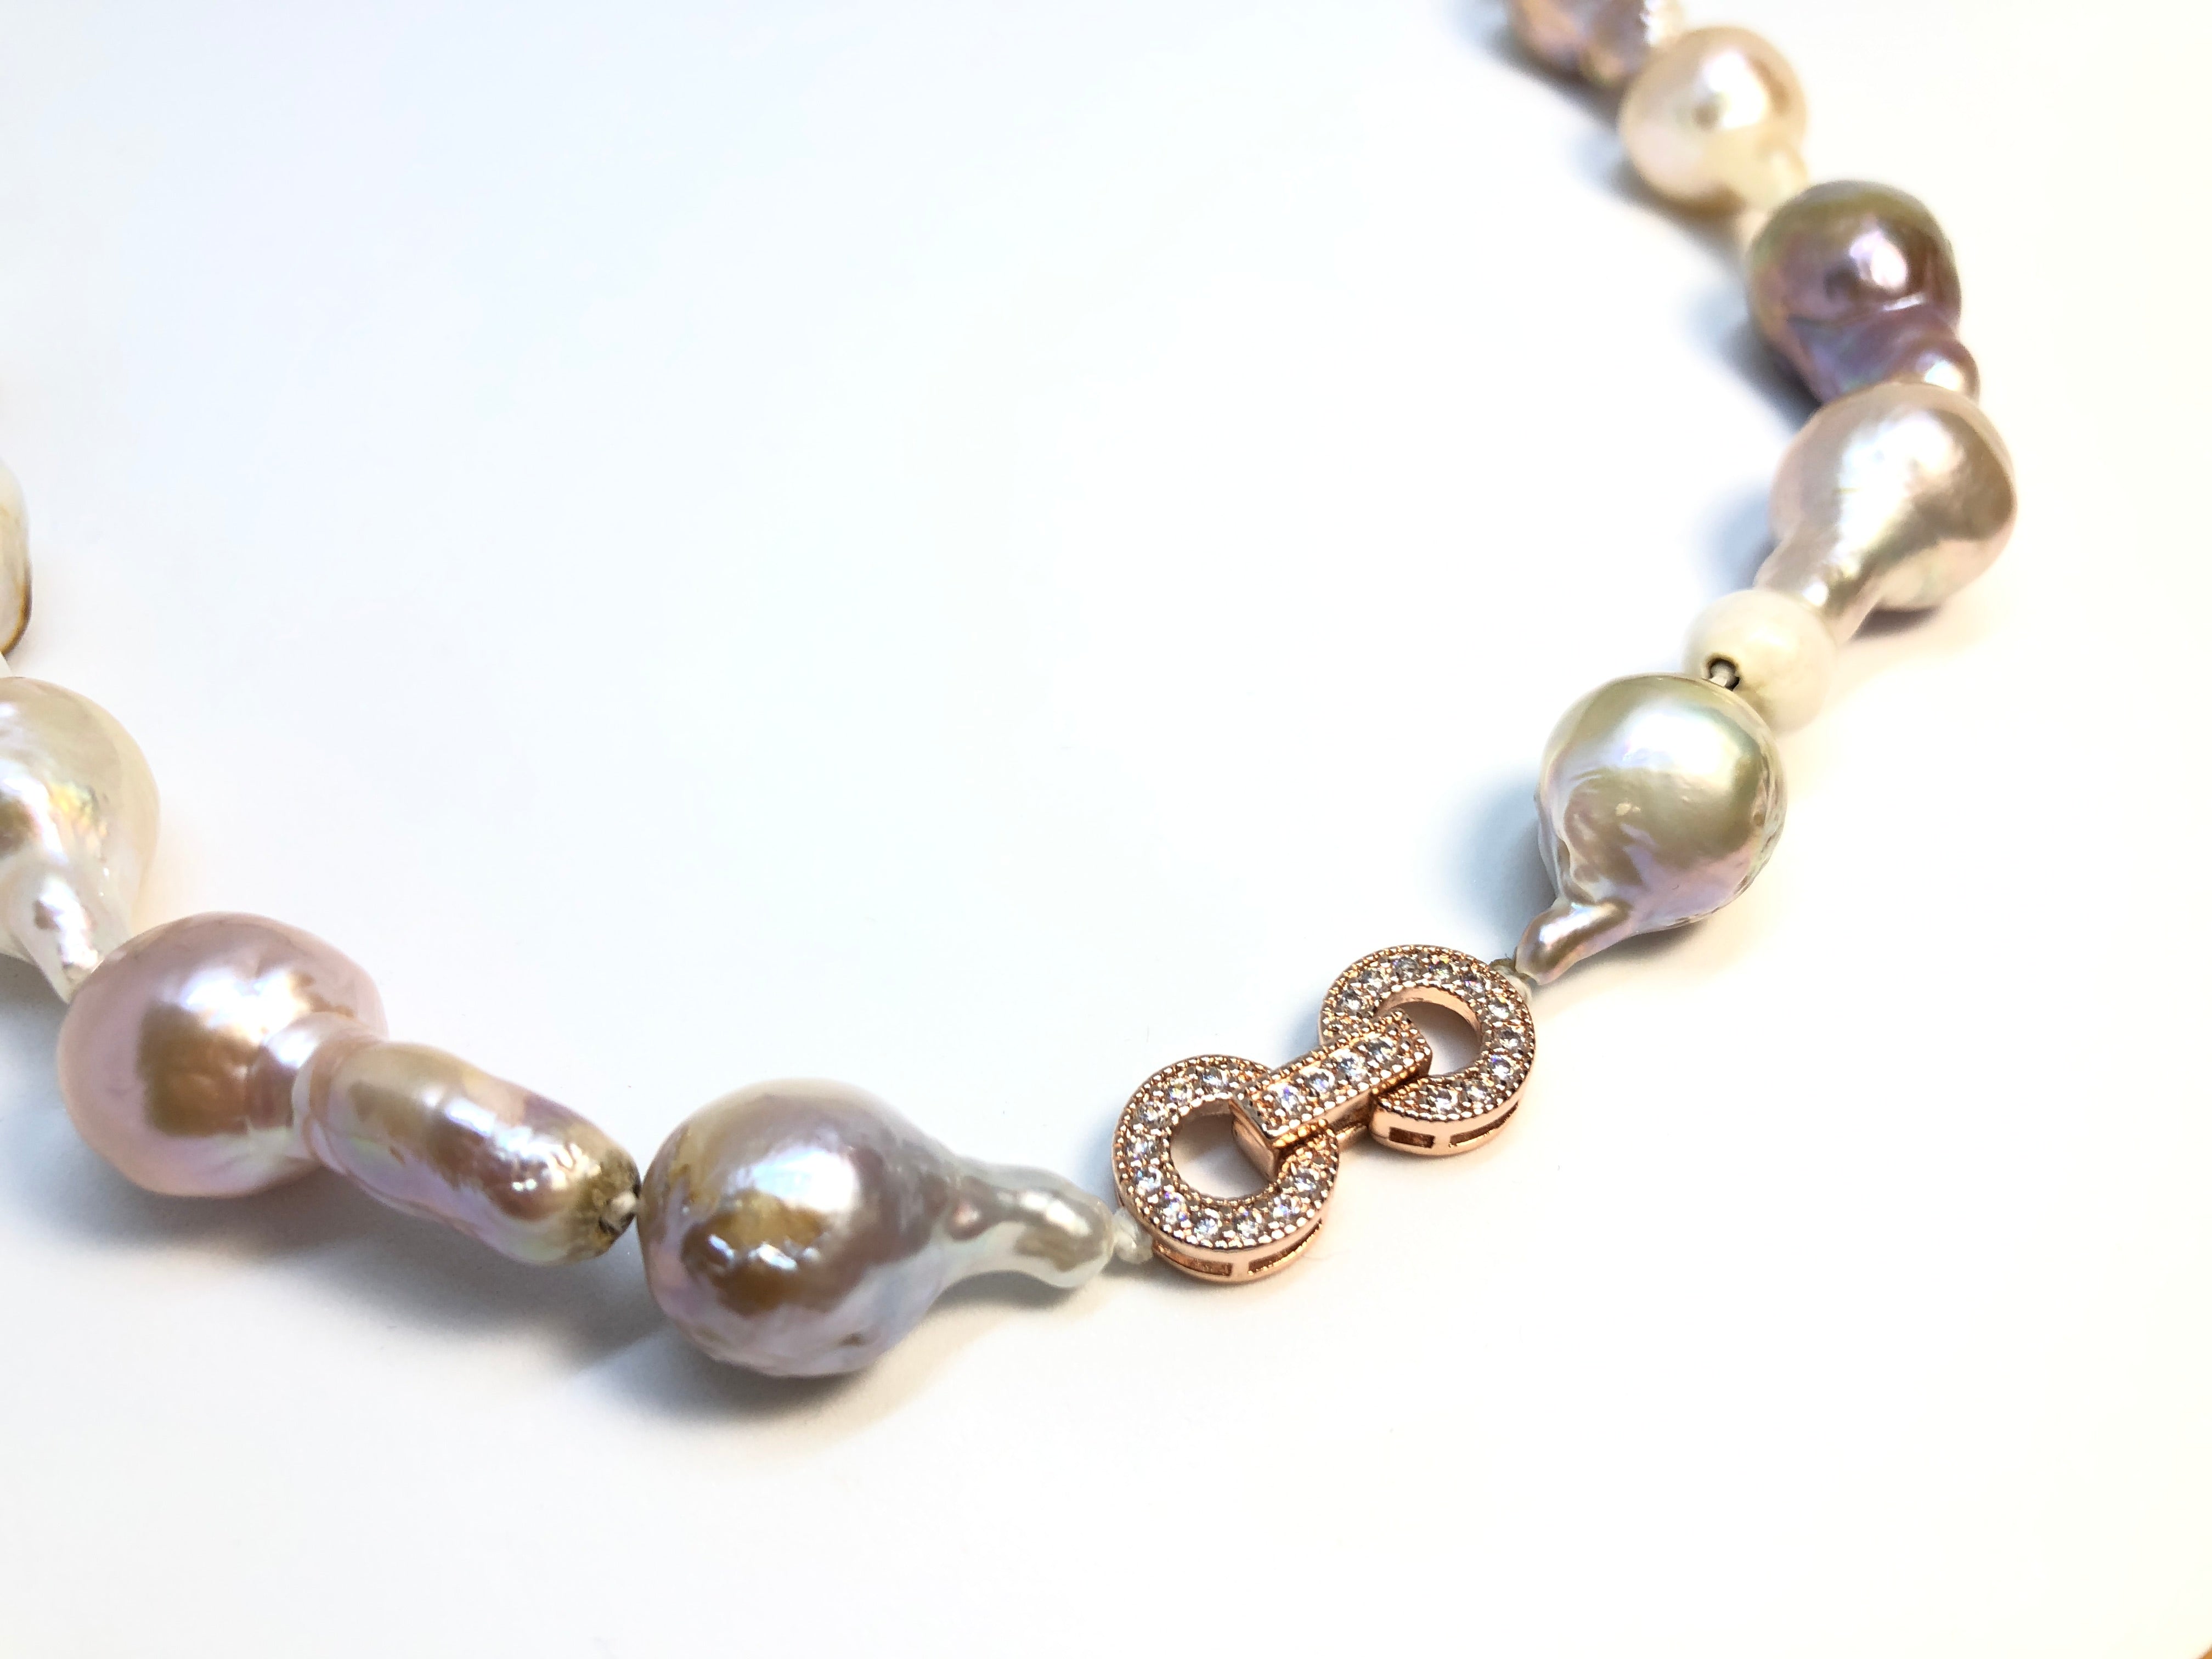 Baroque Pearl Necklace 11-13mm - Angel the Pearl Girl